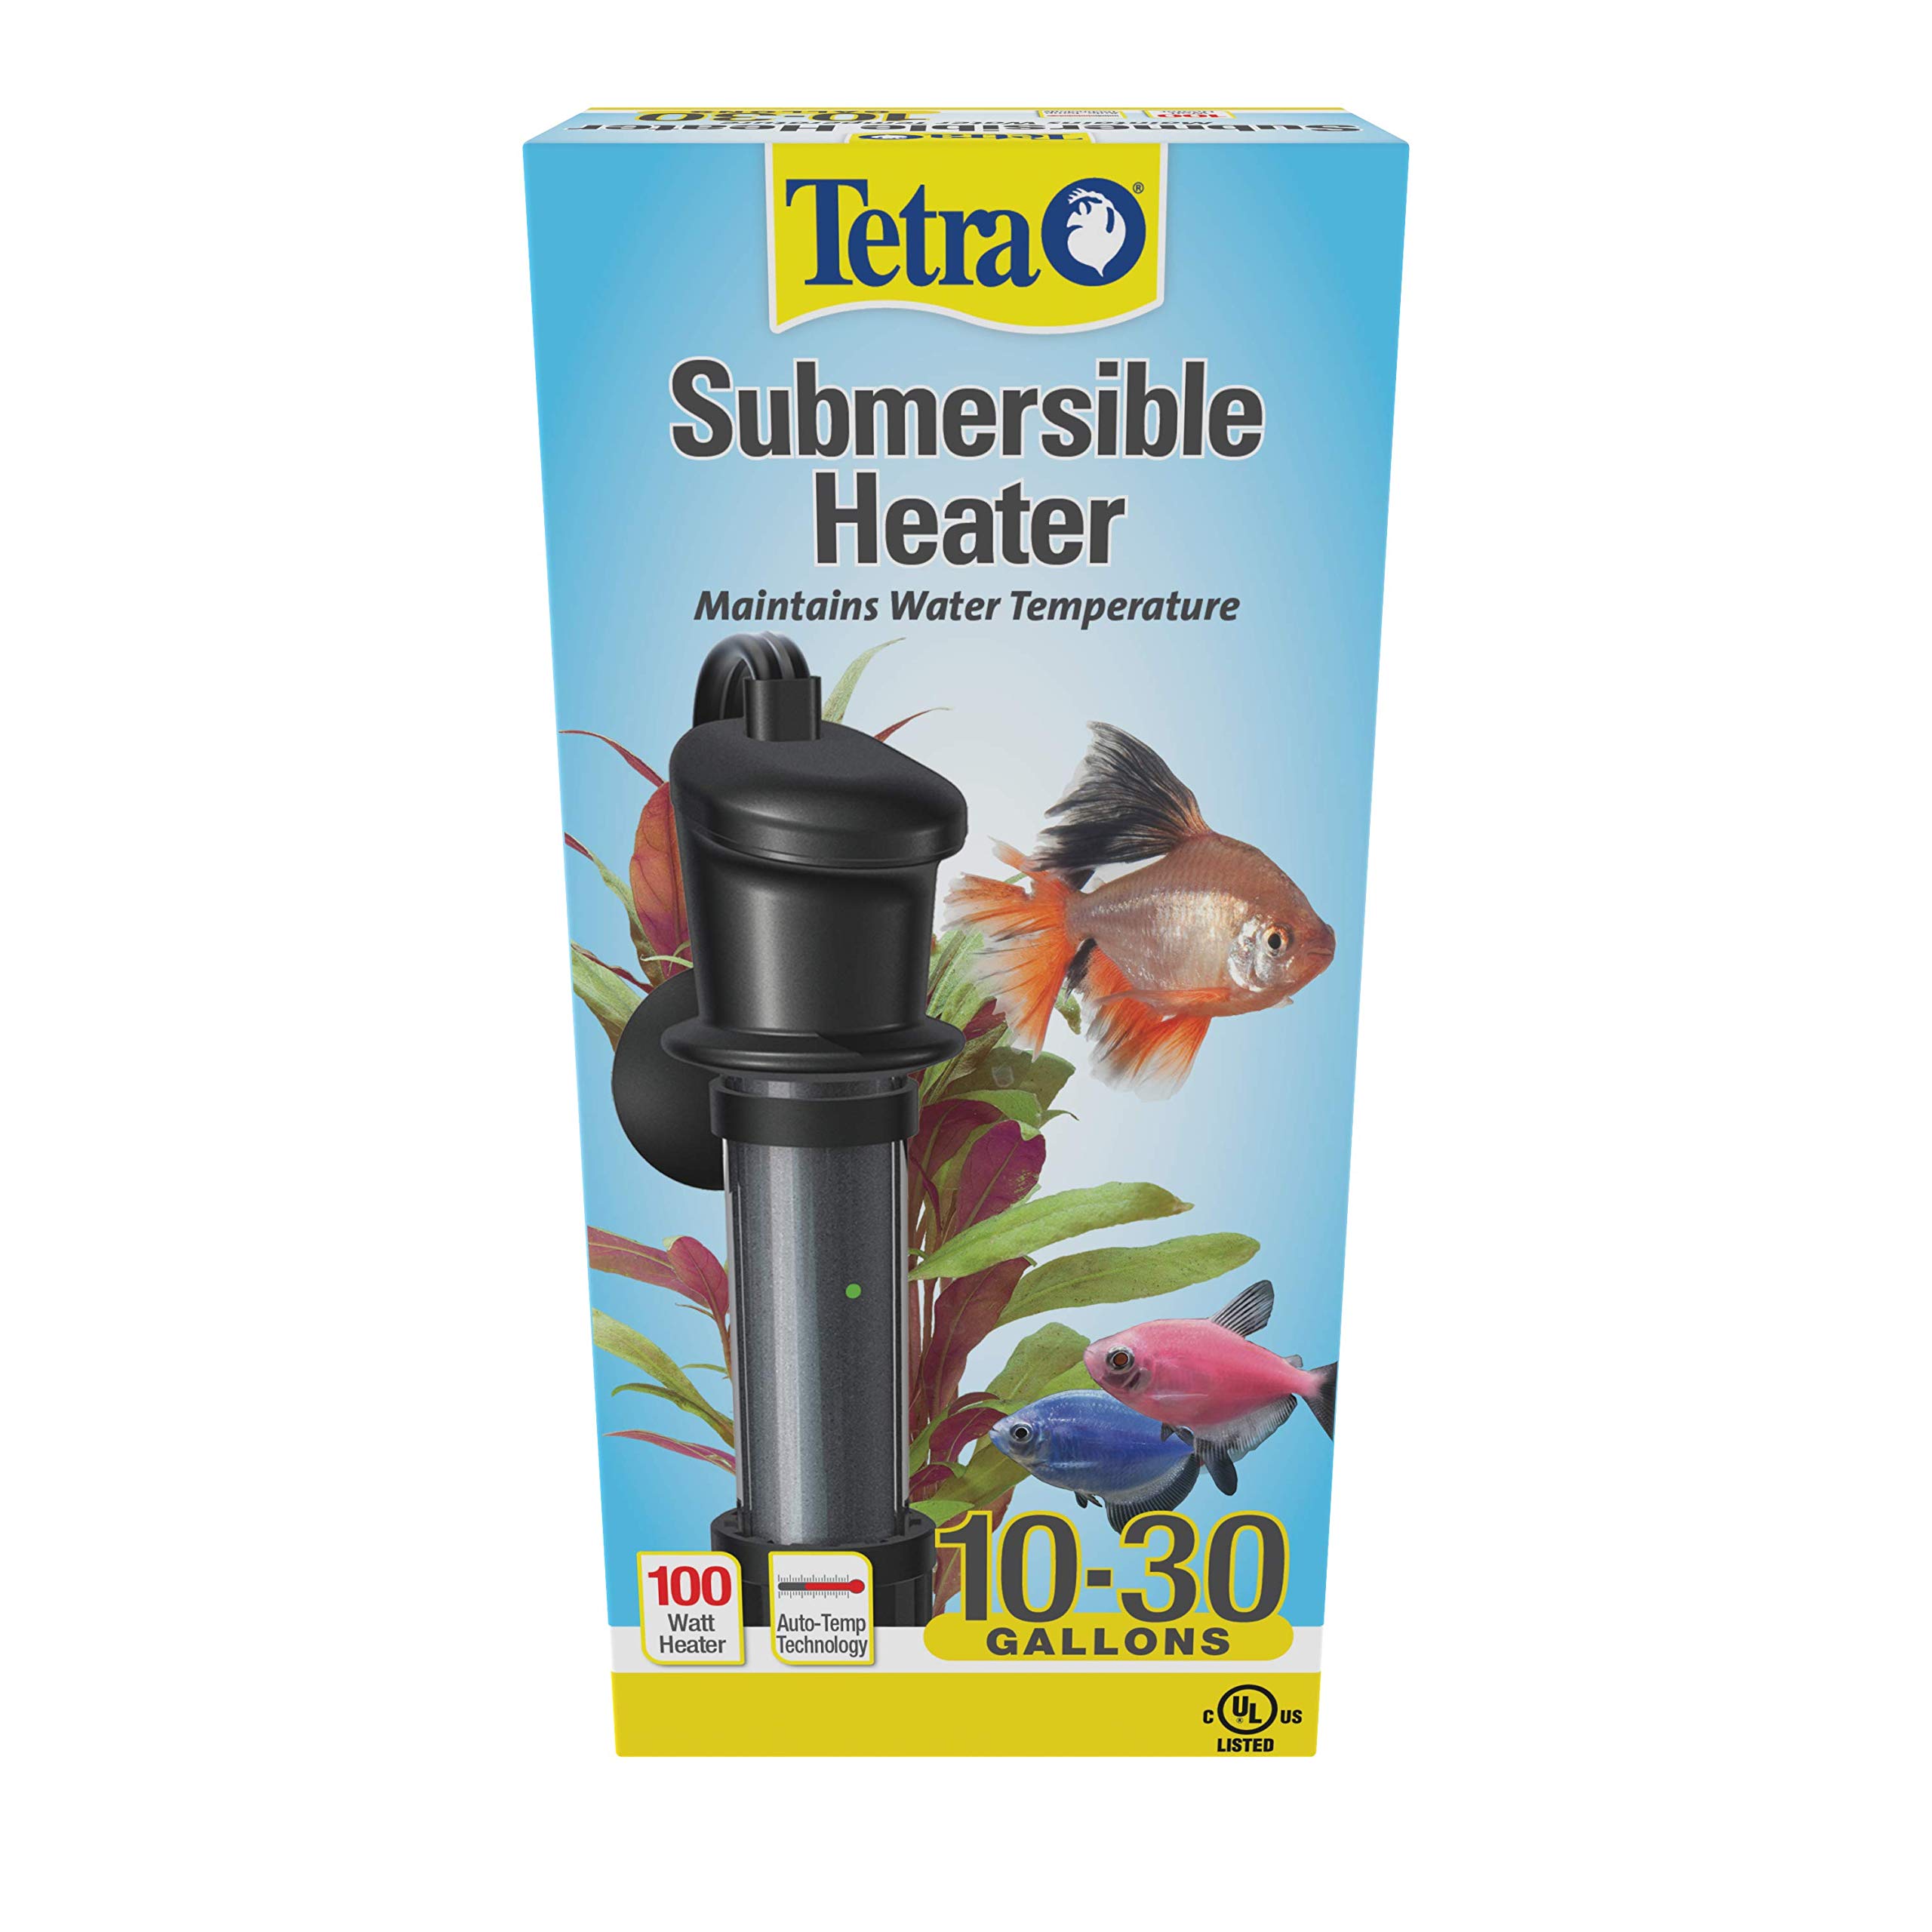 Tetra 26446 HT 100W Submersible Aquarium Heater with Electronic Thermostat, Multicolor.